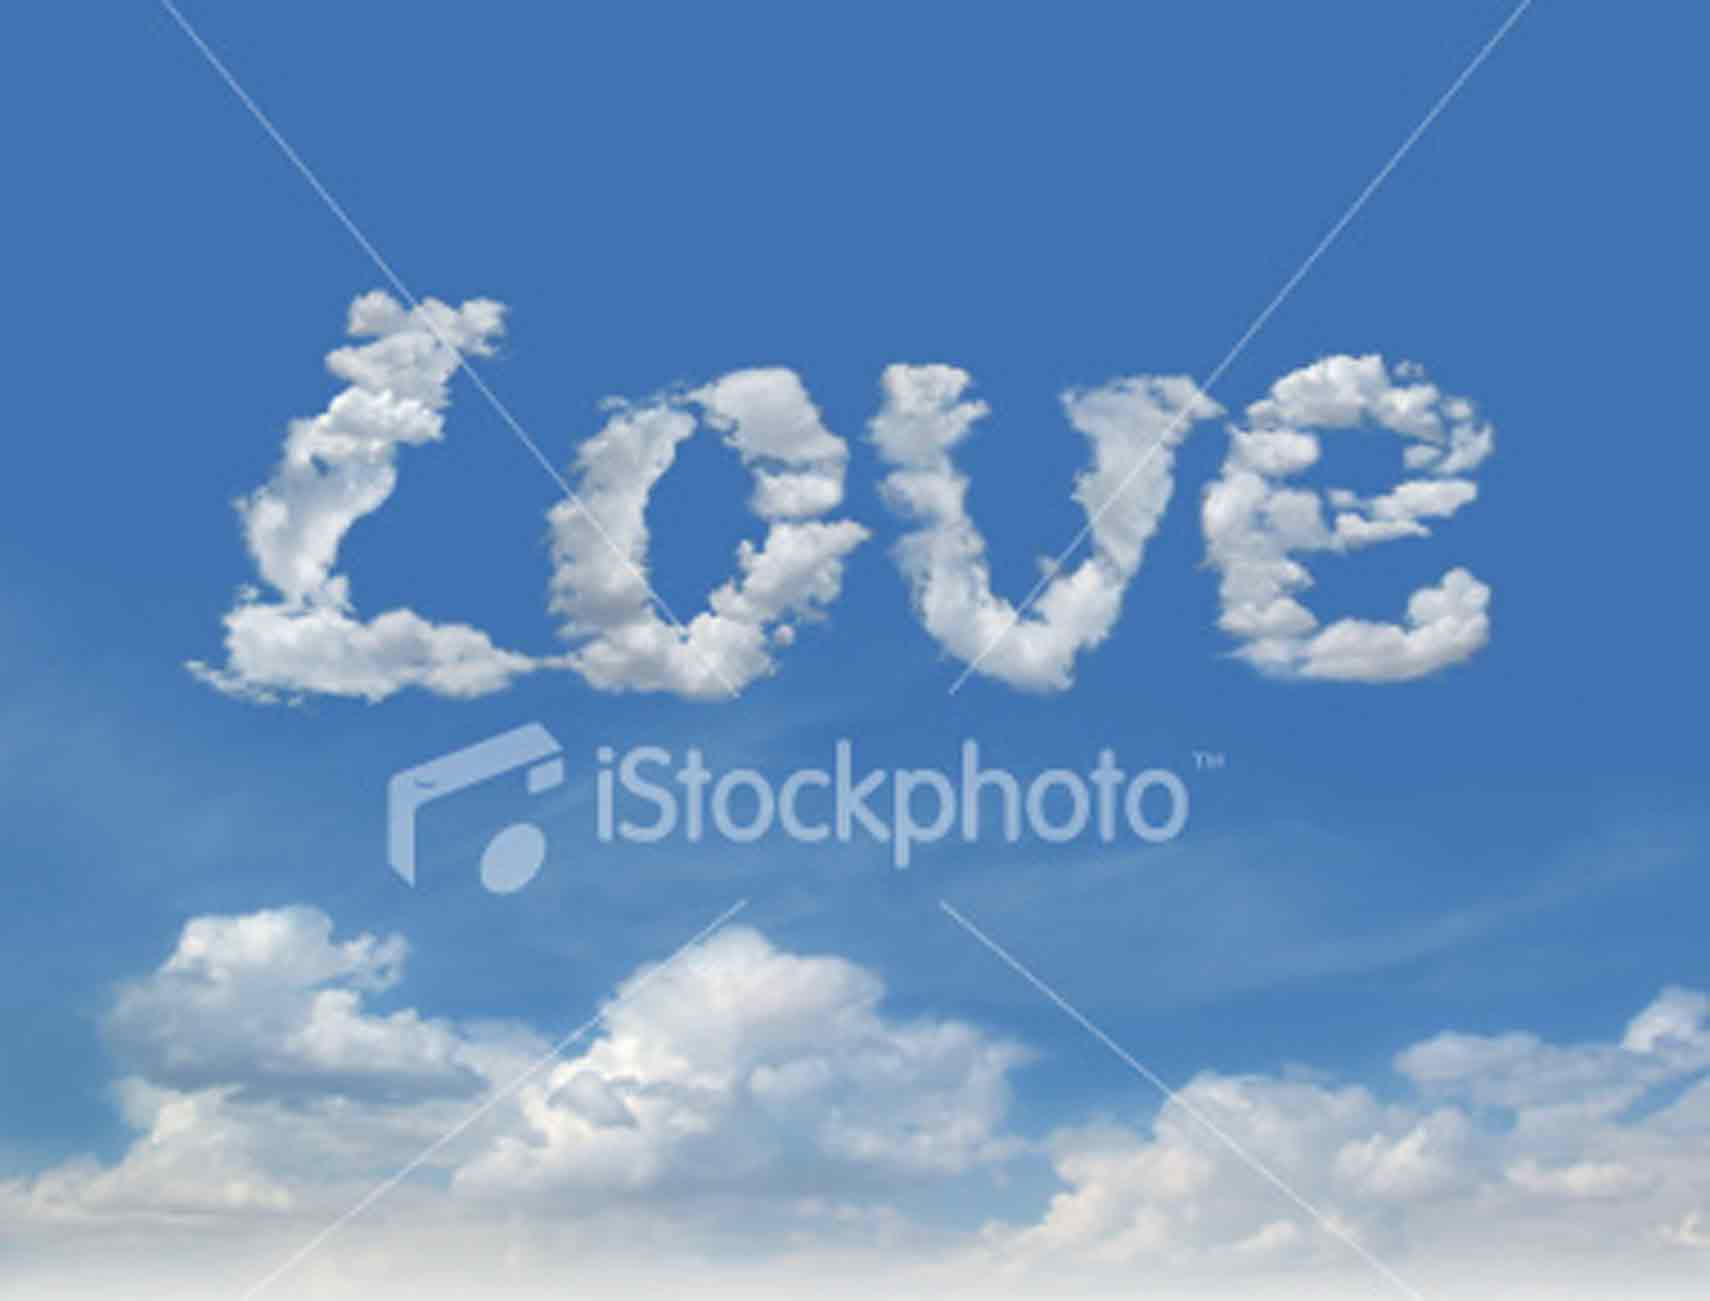 ist2_5022690_clouds_of_love